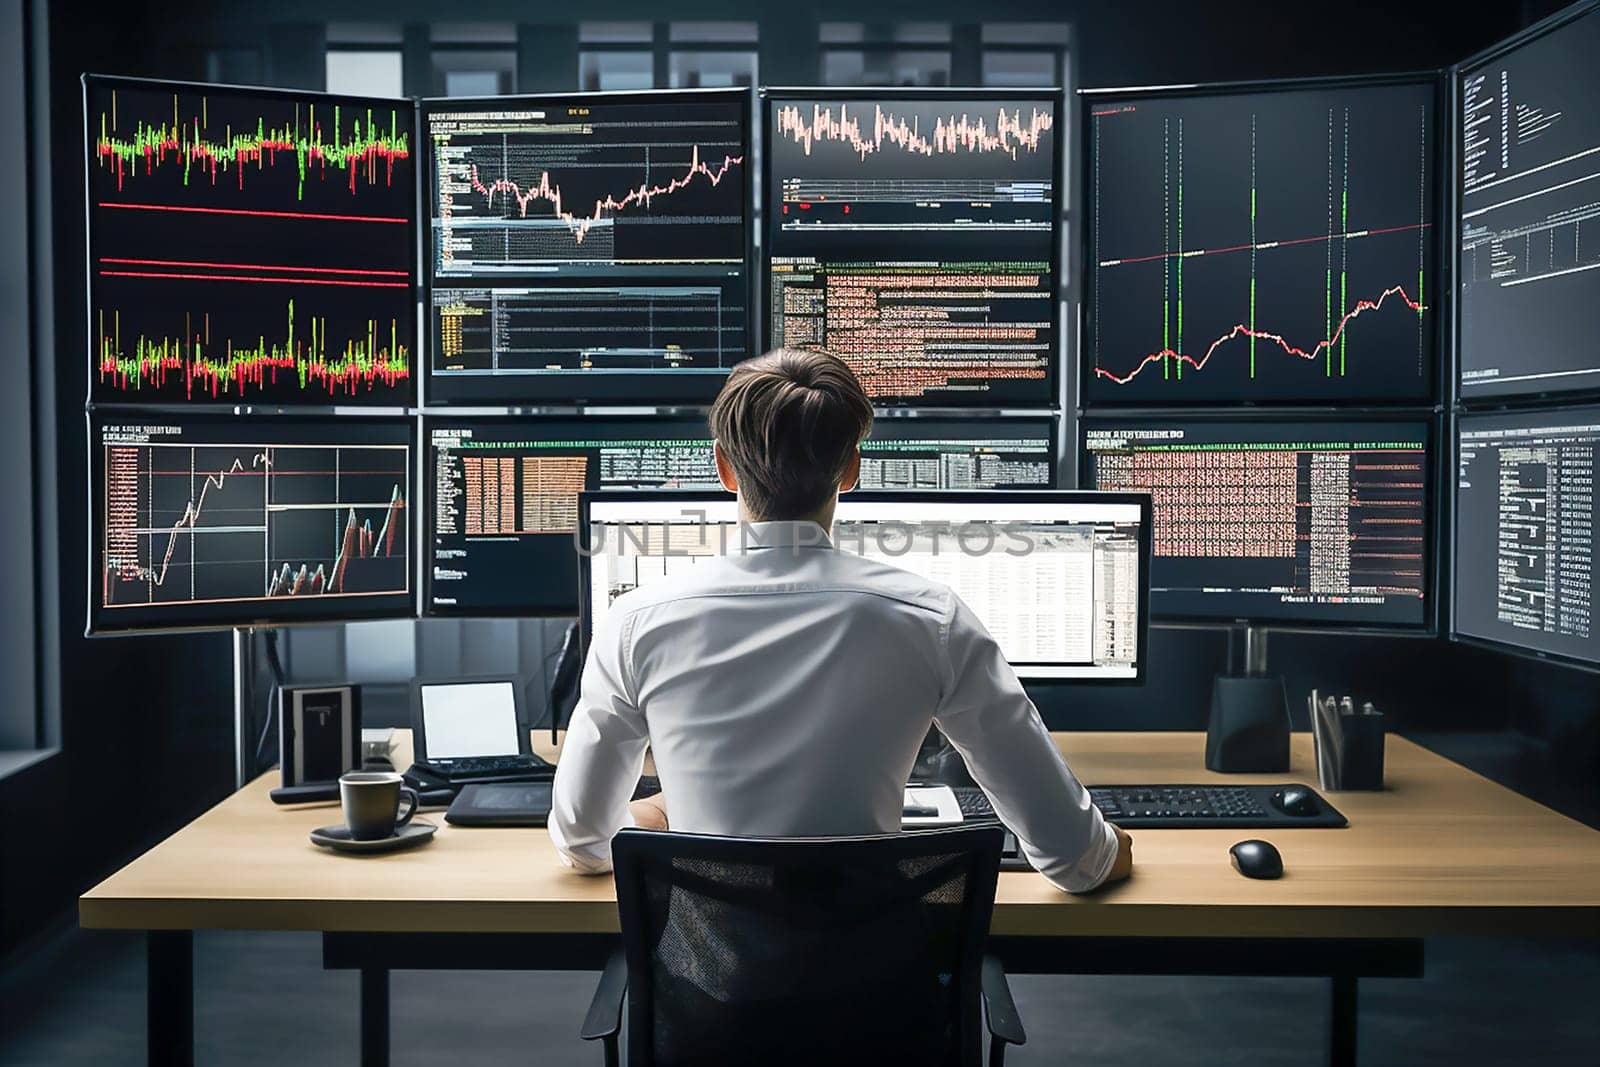 A trader of a brokerage agency trades on the stock exchange, analyzes charts on a monitor, sitting at a desk in the office, a view from the back, dressed in a white shirt by claire_lucia